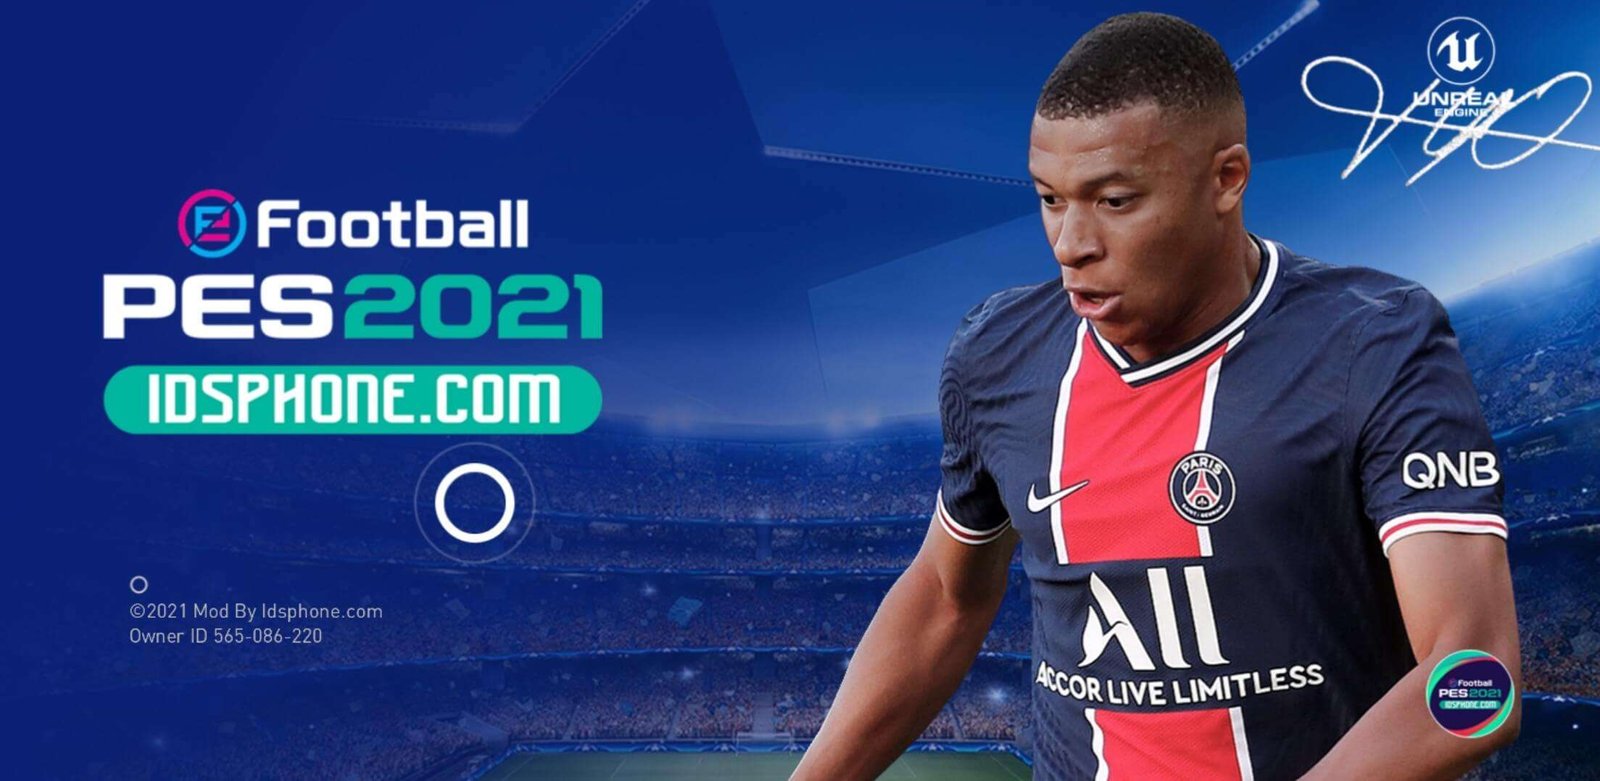 efootball pes 21 mobile